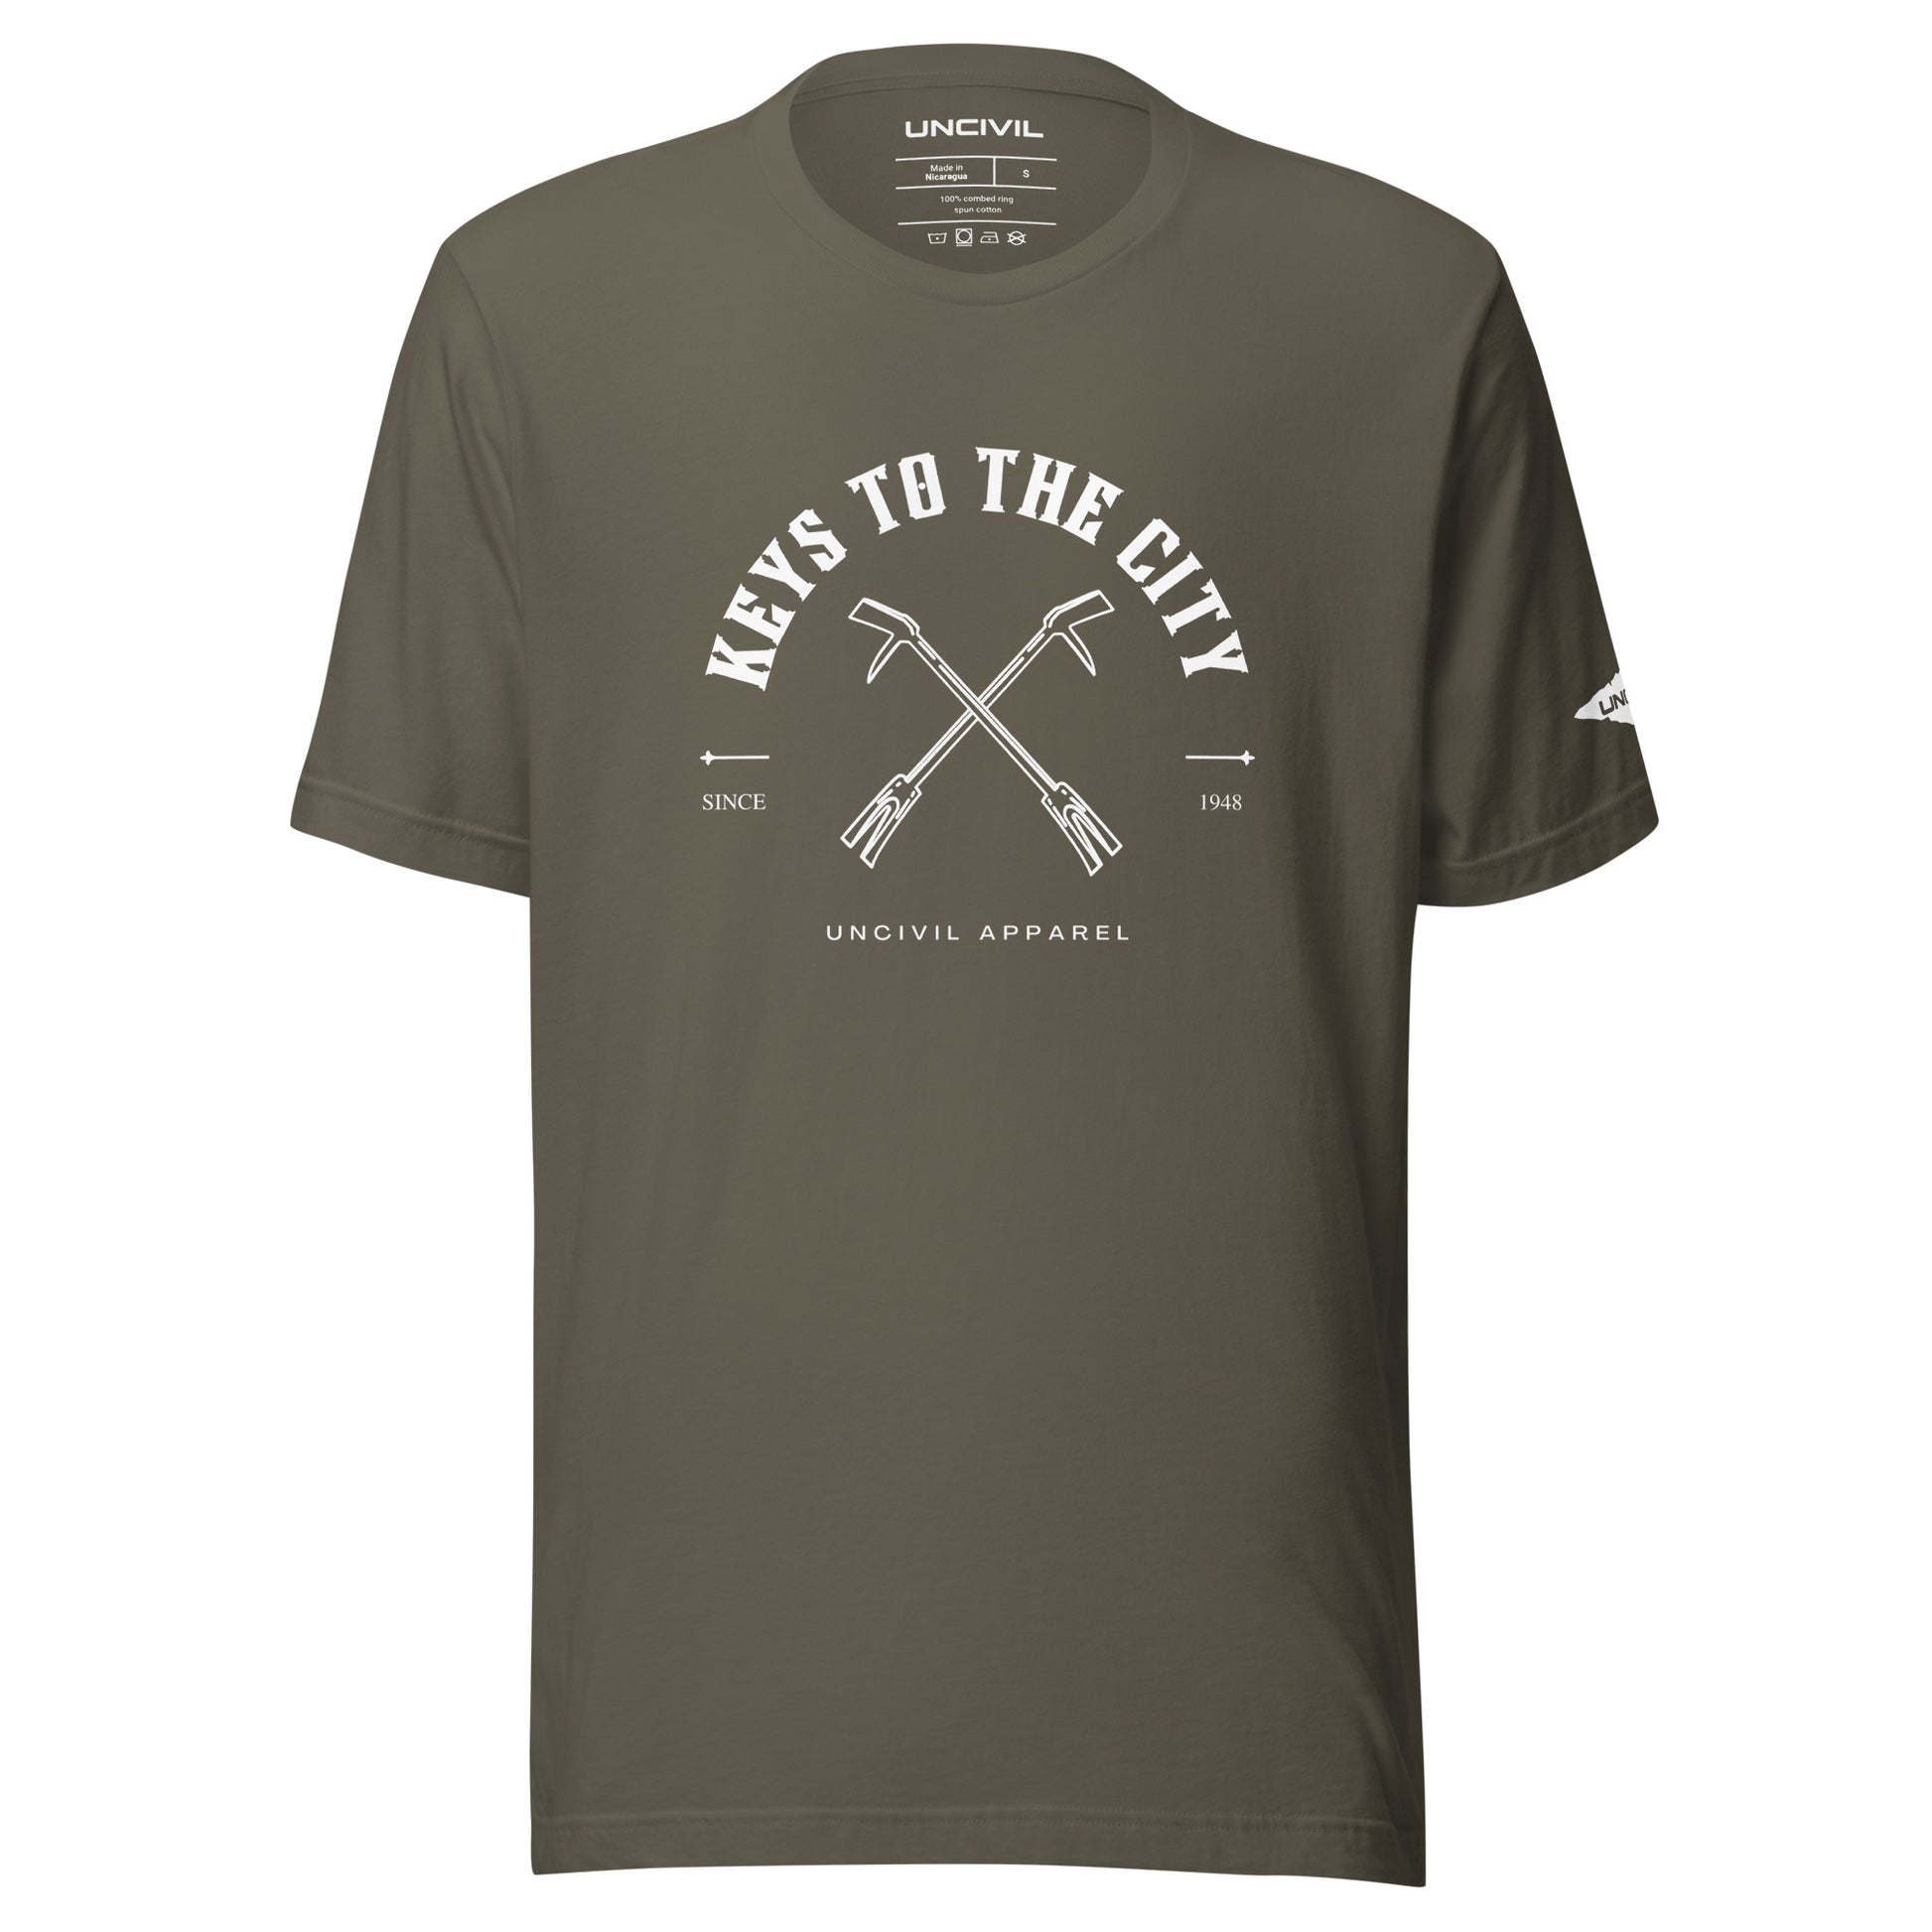 Keys to the City, Halligan Bar Design, Army Green Unisex T-shirt for Firefighters